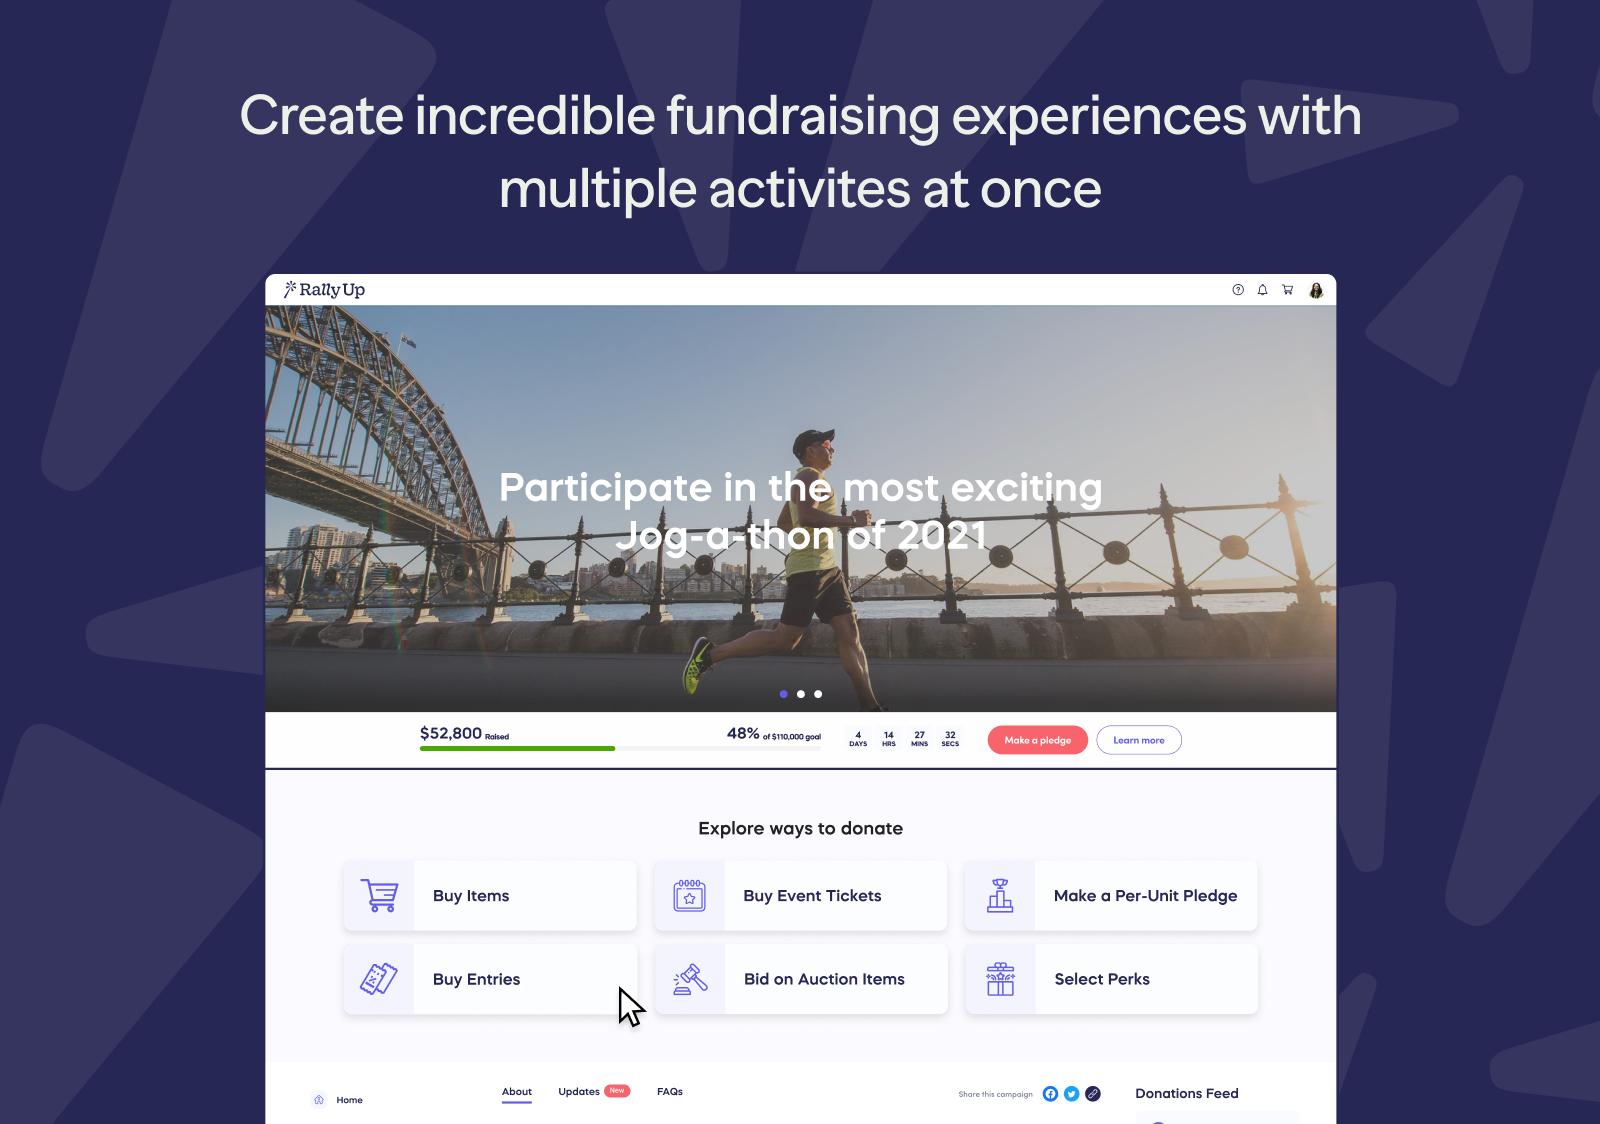 Create incredible fundraising experiences with multiple activities at once